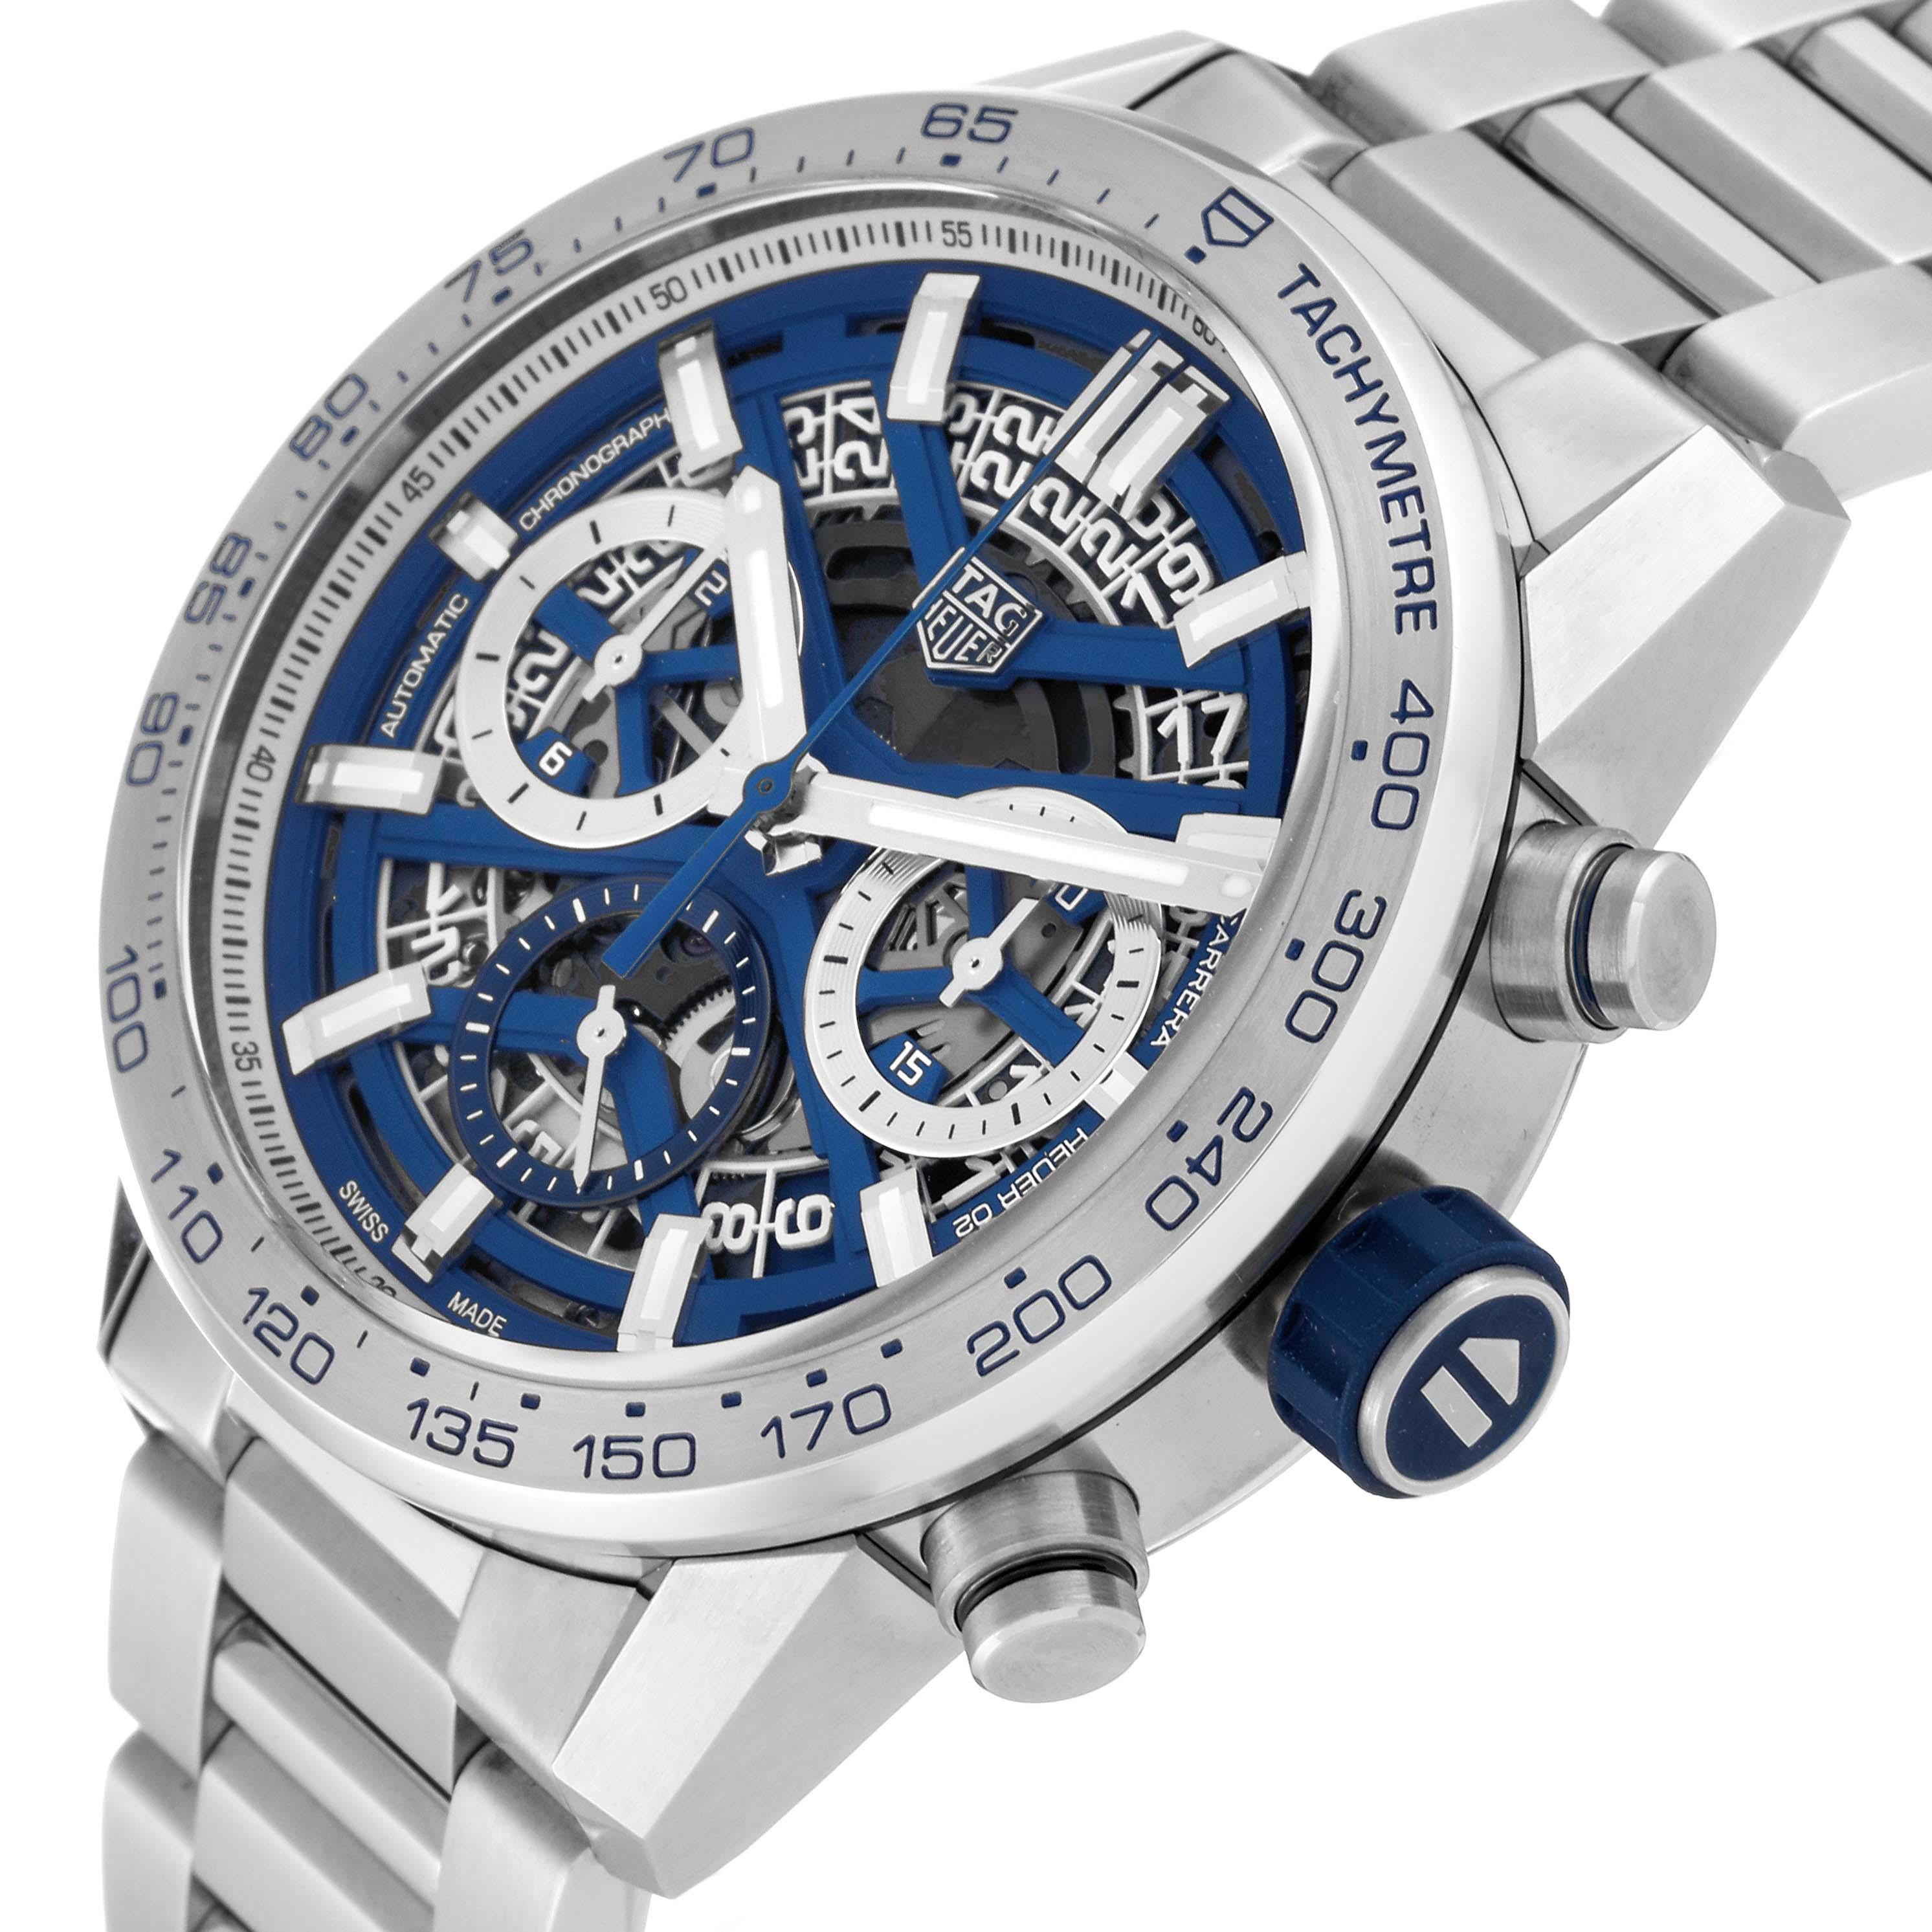 Tag Heuer Carrera Skeleton Dial Japan Limited Edition Steel Mens Watch CBG2019 Box Card. Automatic self-winding chronograph movement. Stainless steel case 43.0 mm in diameter. Transparent exhibition sapphire crystal caseback. Crown with blue rubber